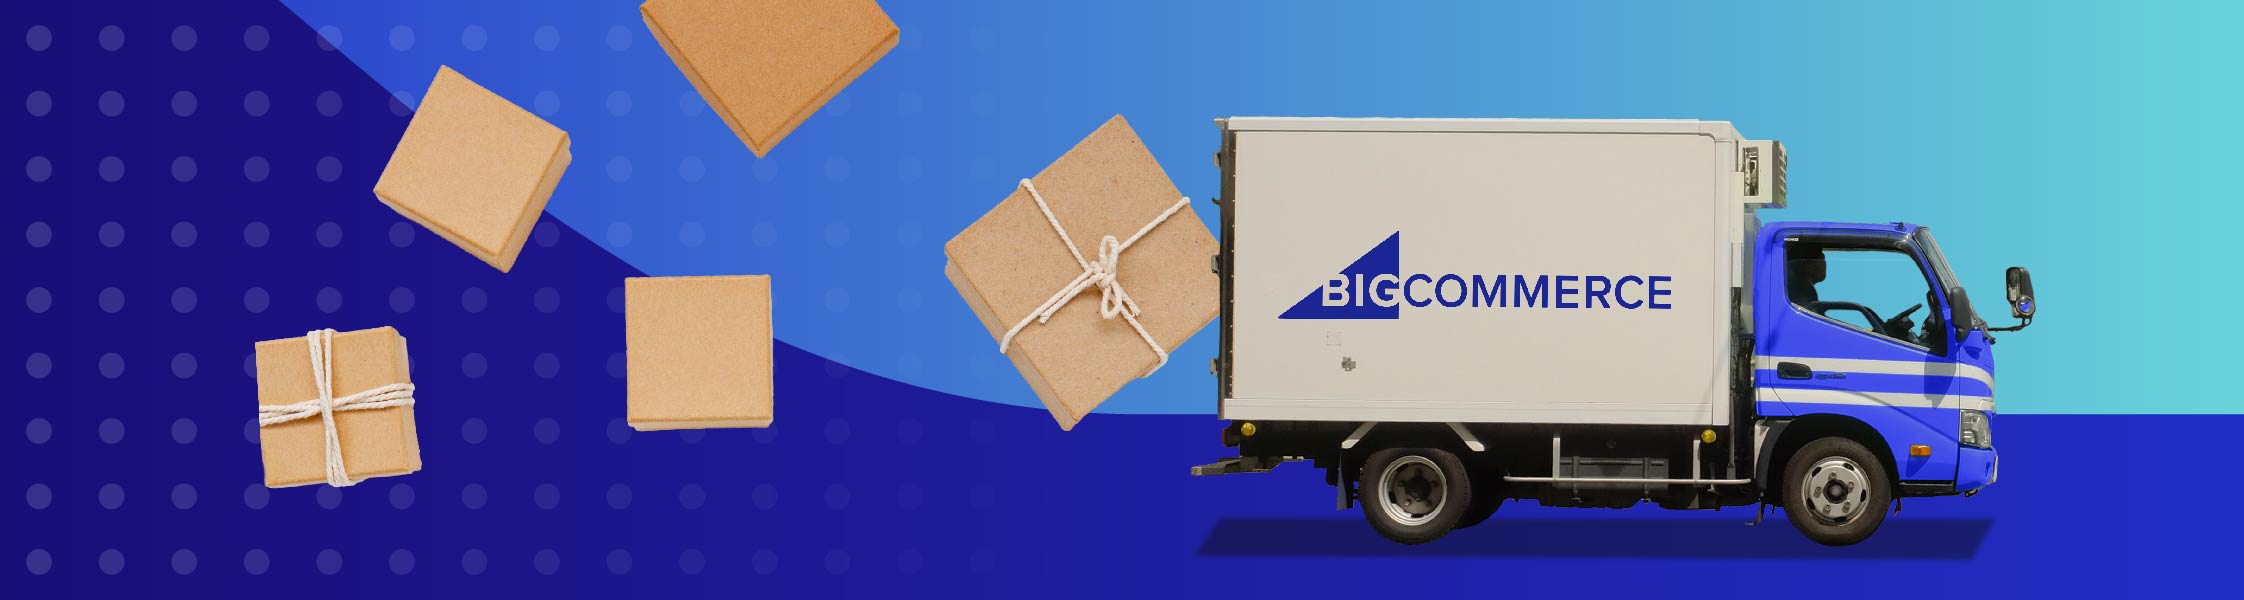 Expedited Shipping: How to Get Products to Customers Faster?